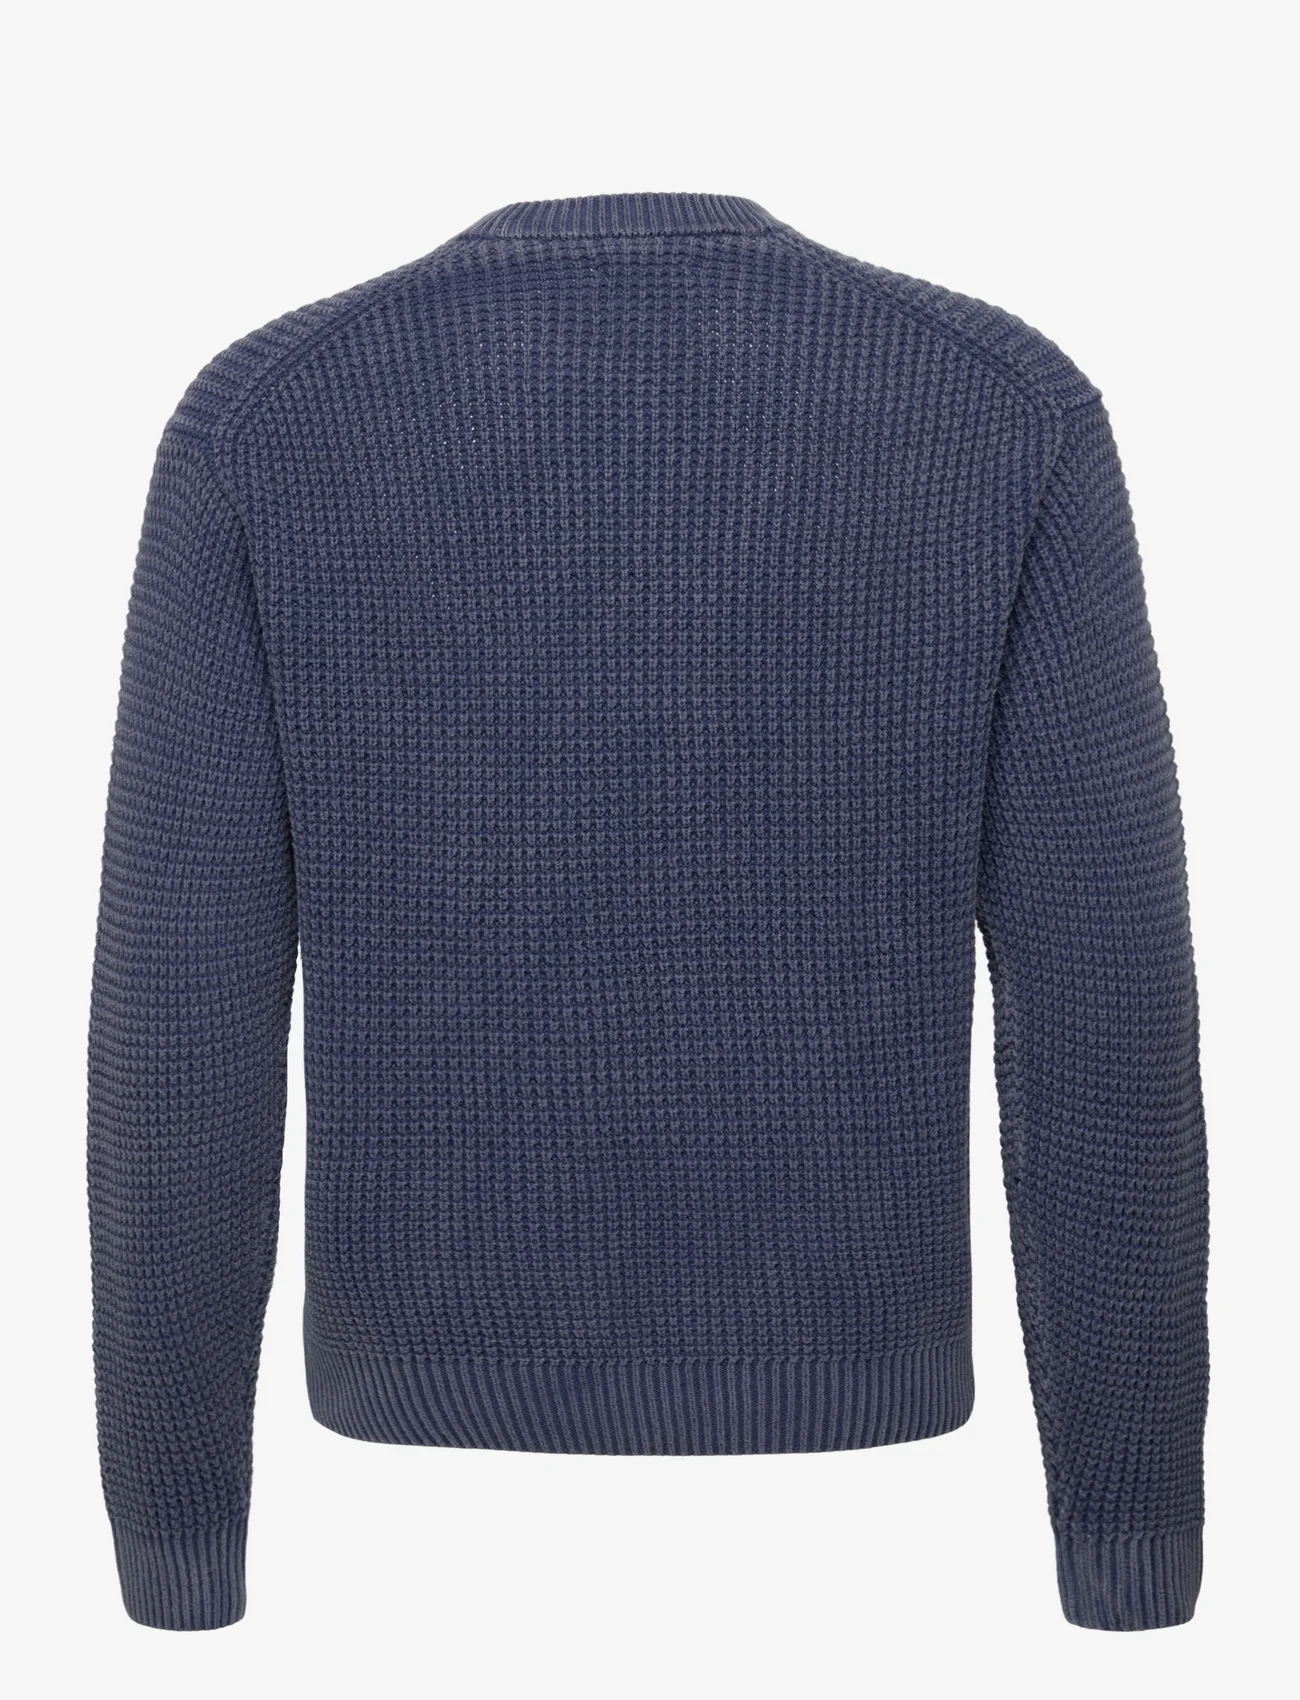 Abercrombie & Fitch - ANF MENS SWEATERS - tavalised kudumid - navy - 1